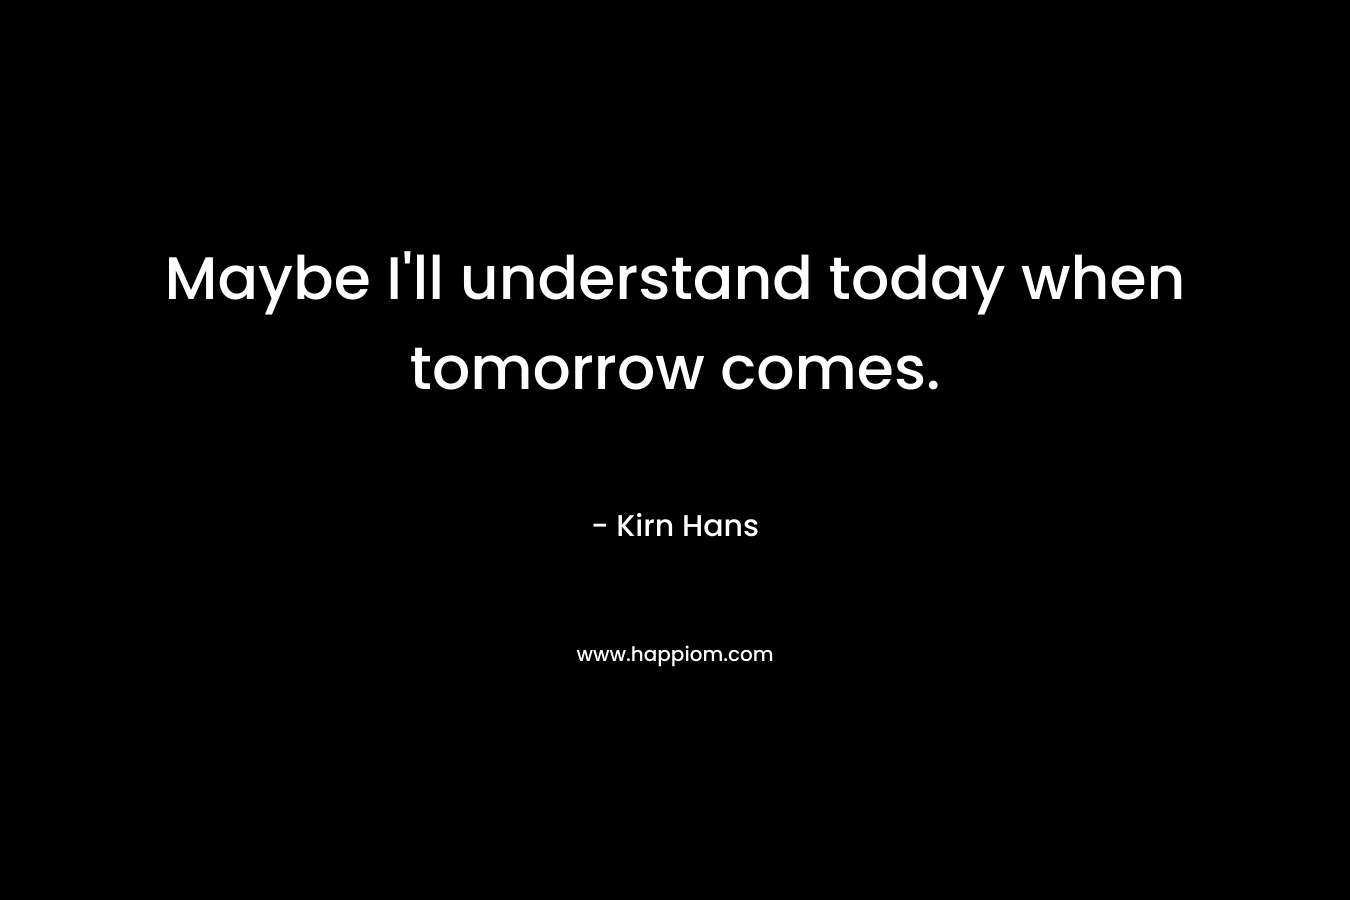 Maybe I'll understand today when tomorrow comes.